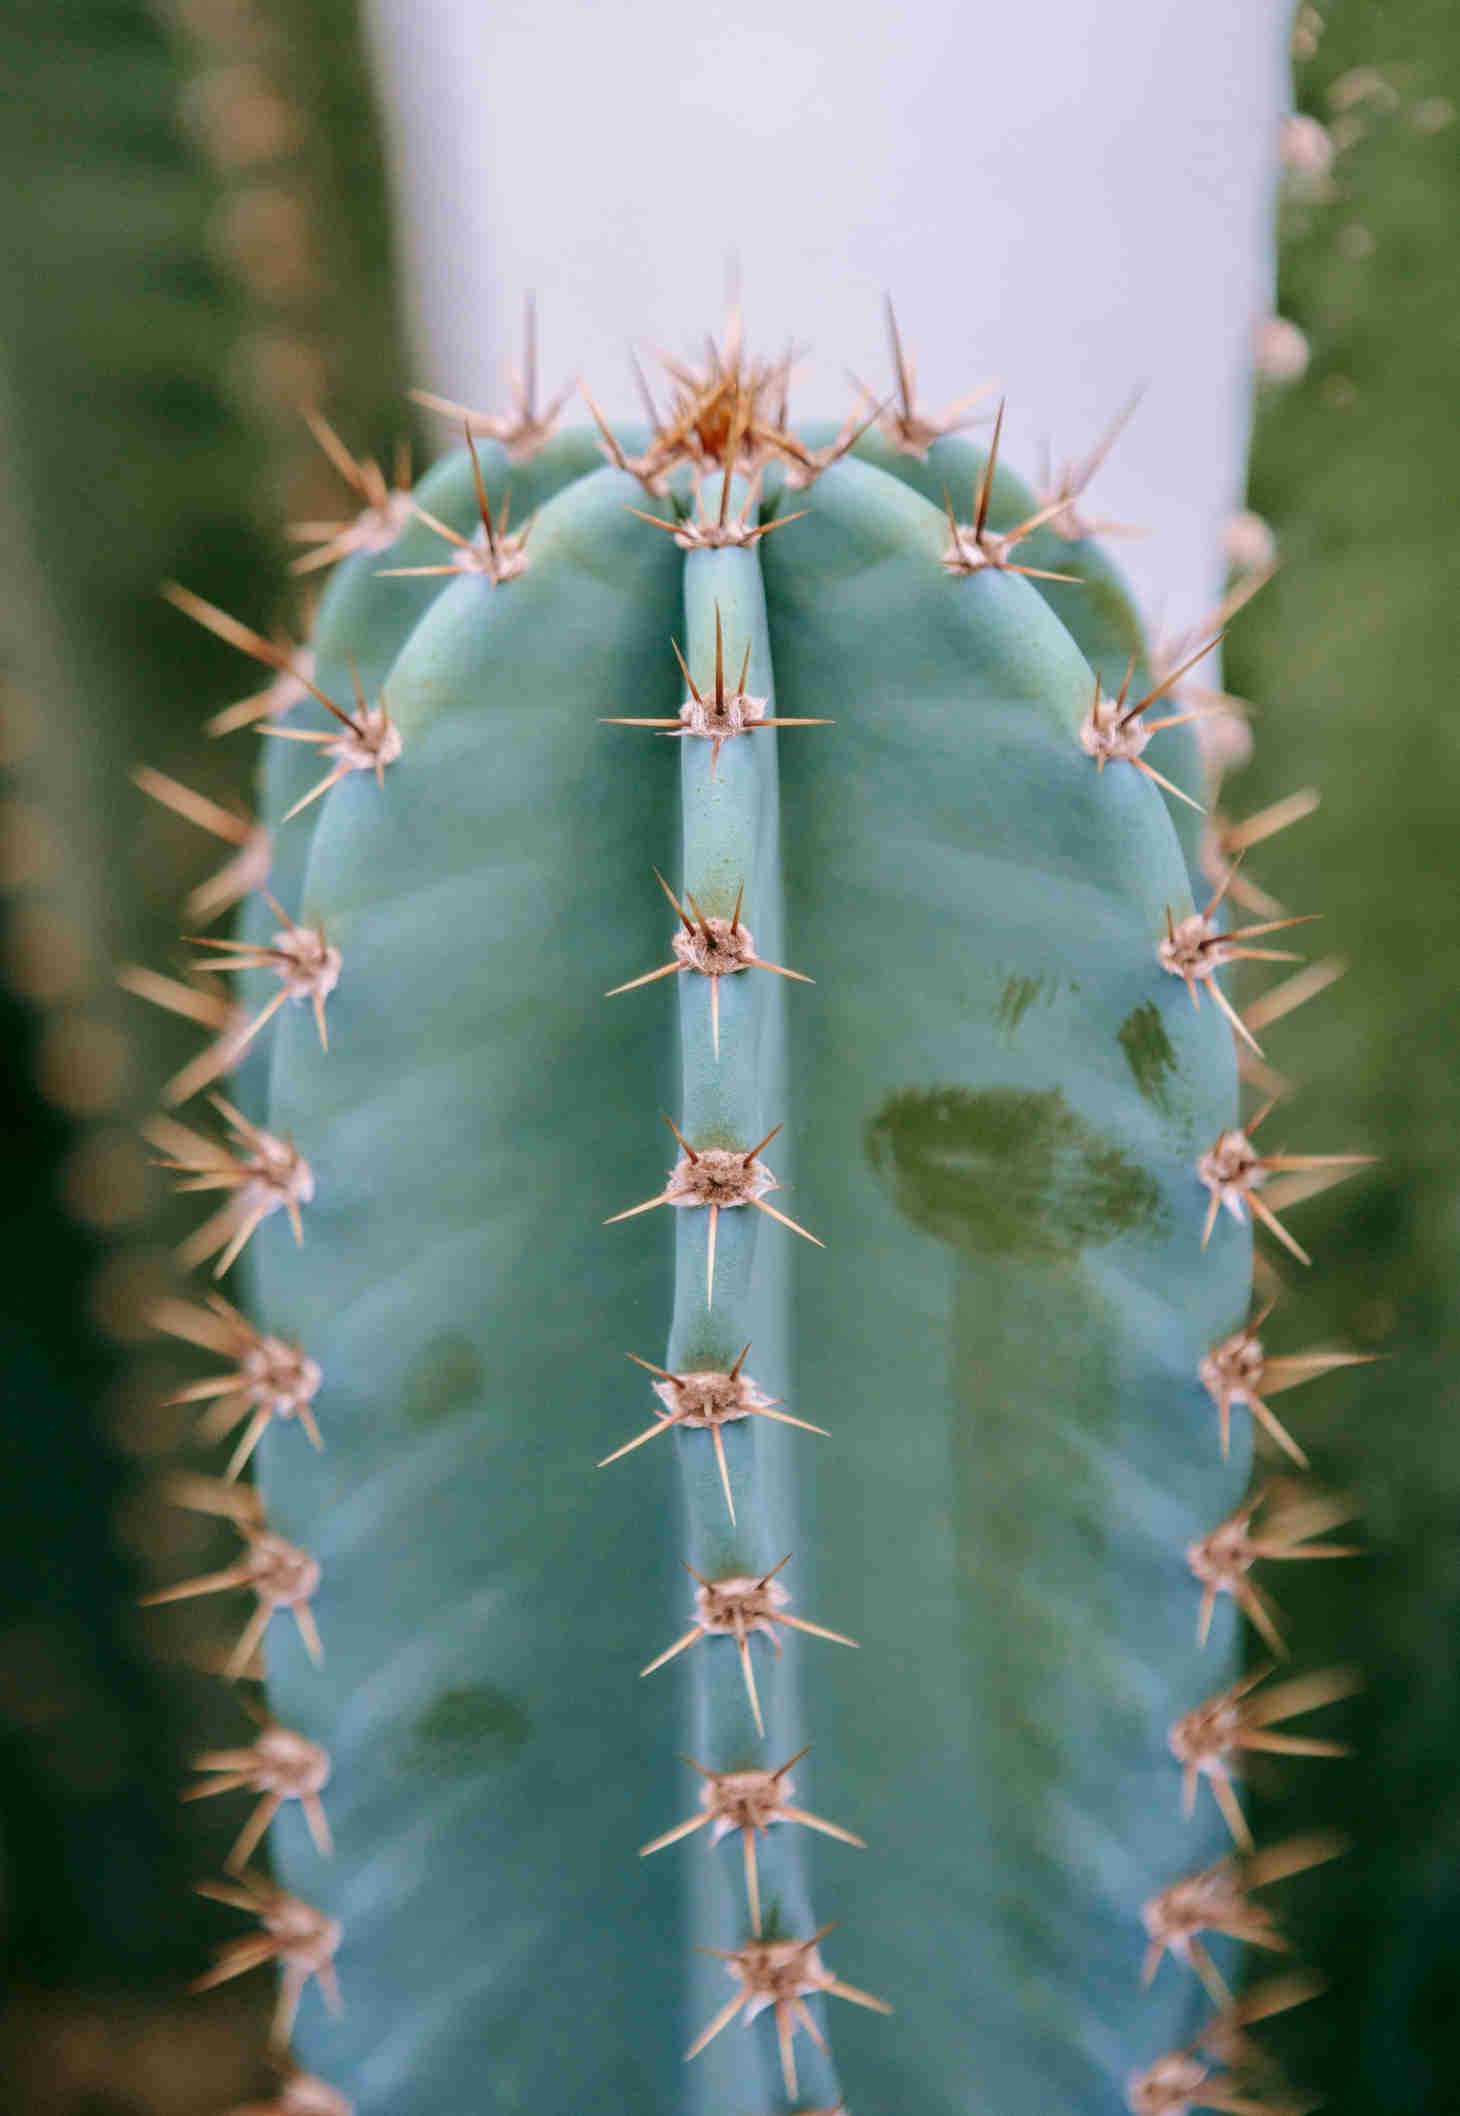 Spines Growing on Cactus Areoles